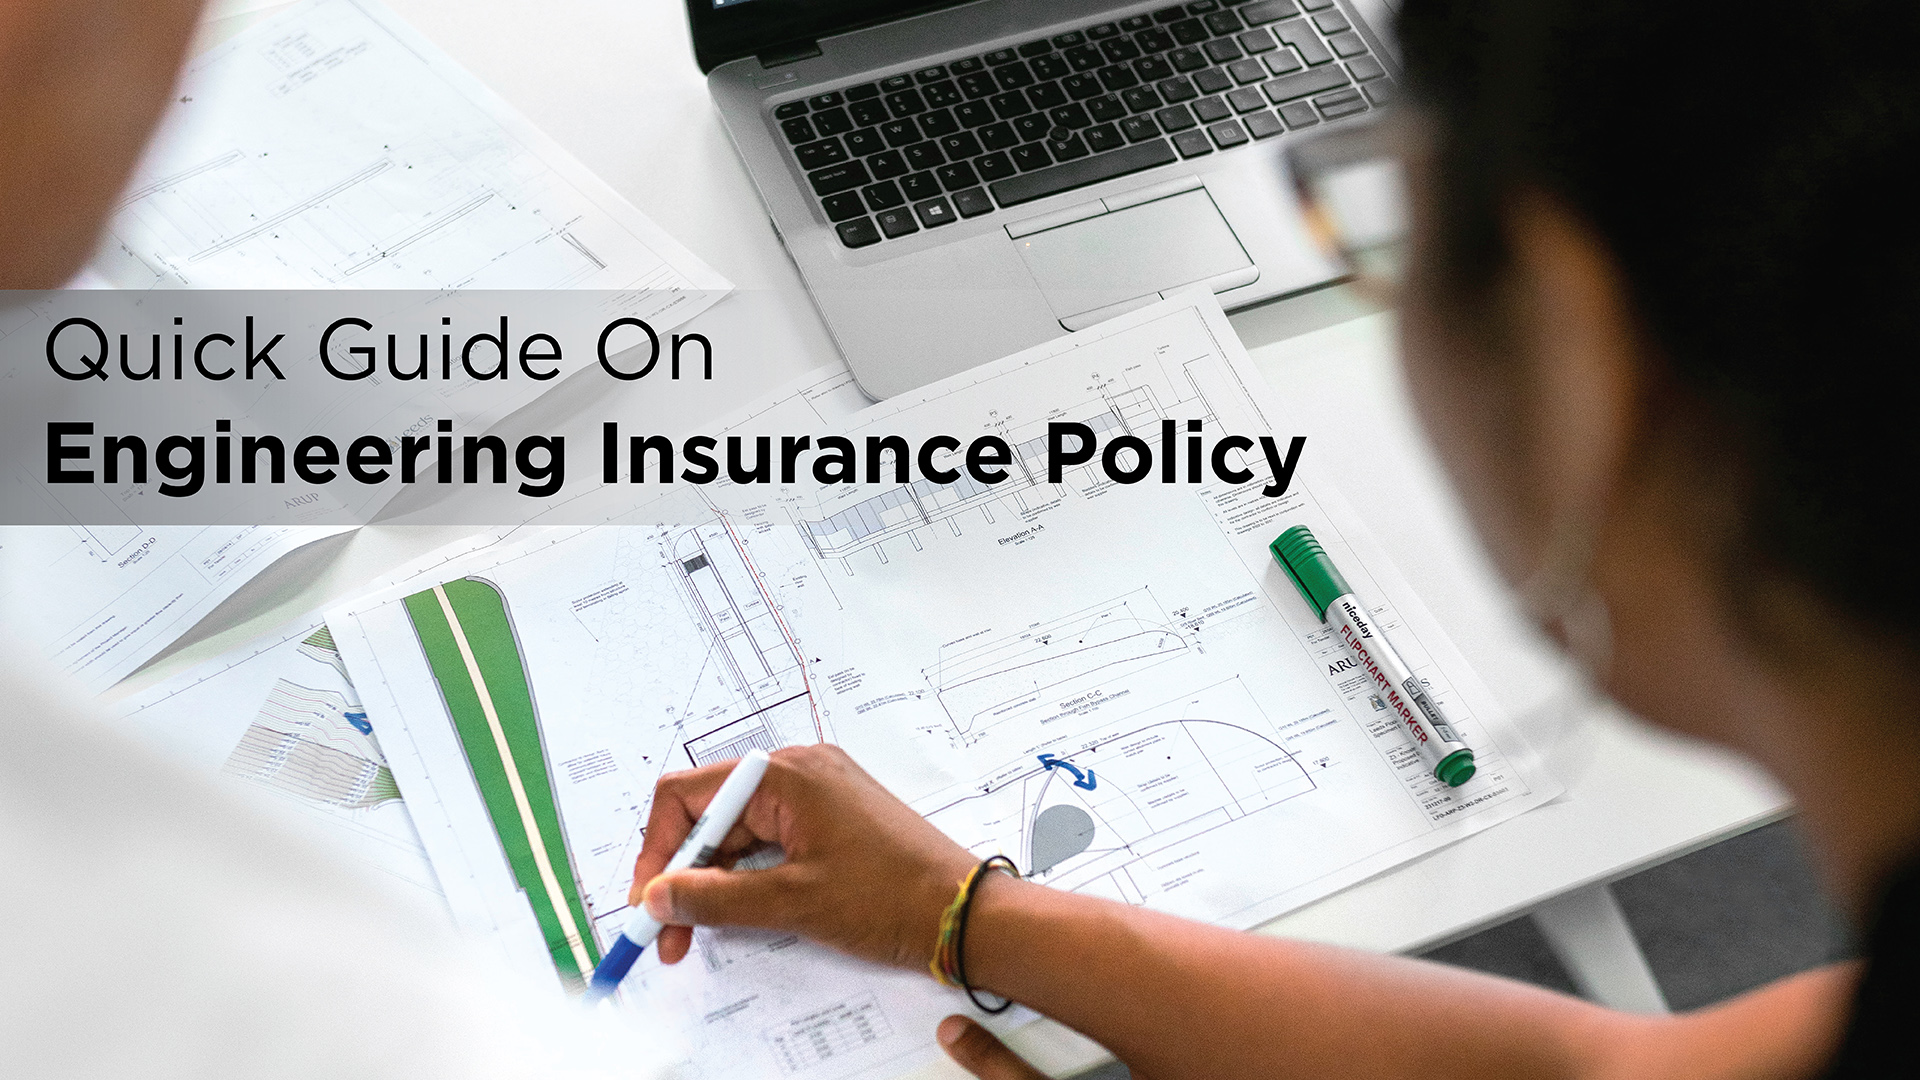 Quick Guide On Engineering Insurance Policy